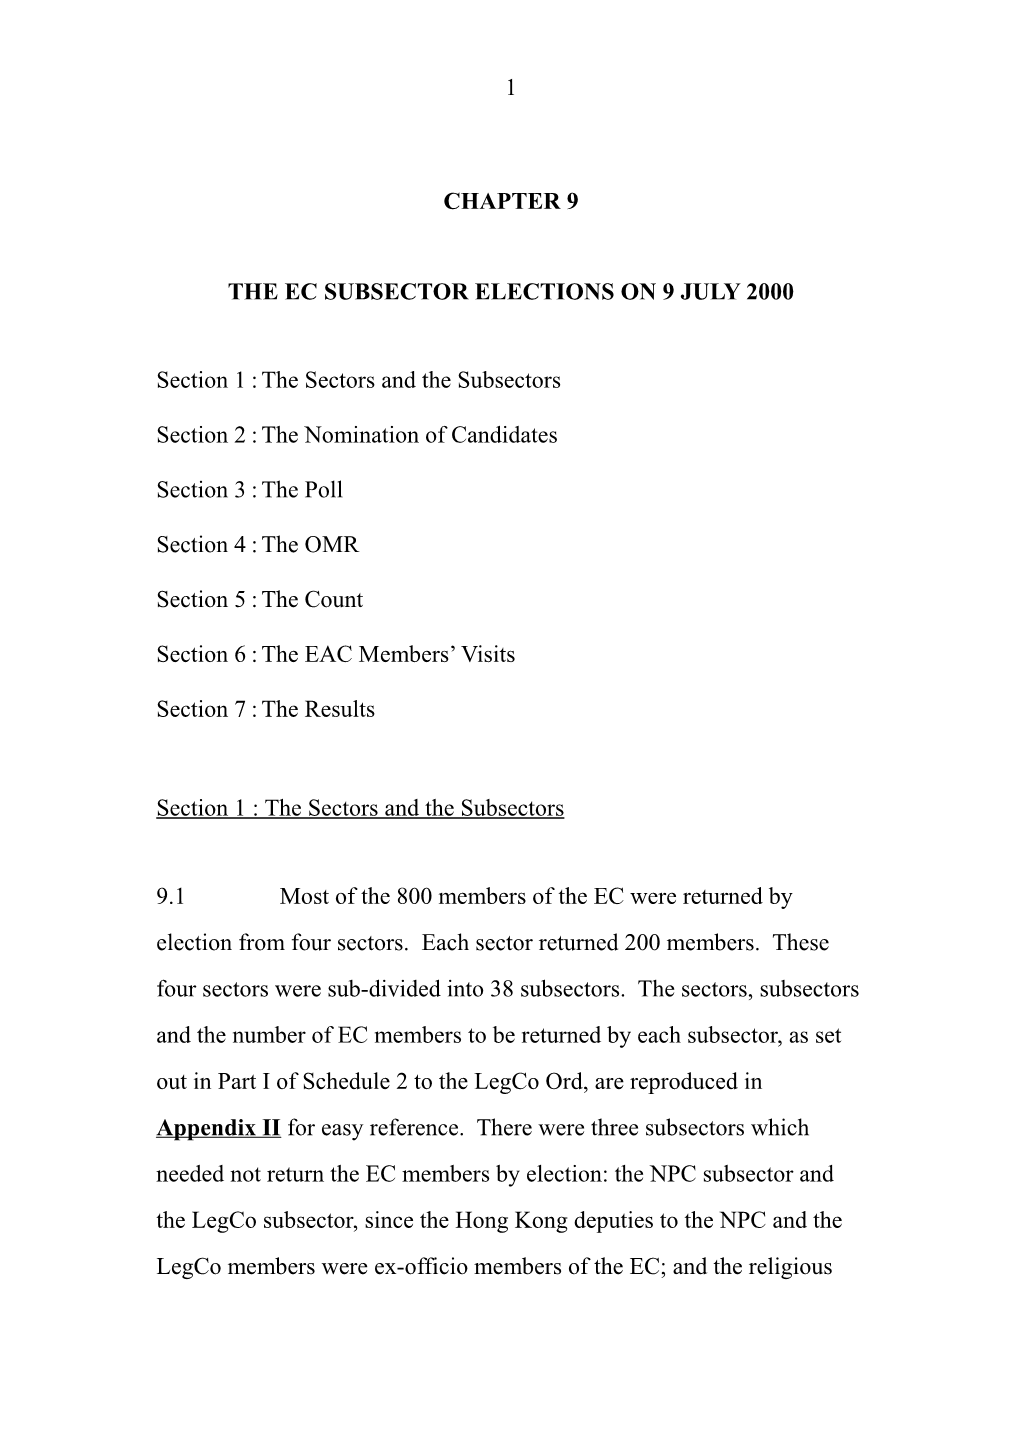 Chapter - the EC Subsector Elections on 9 July 2000